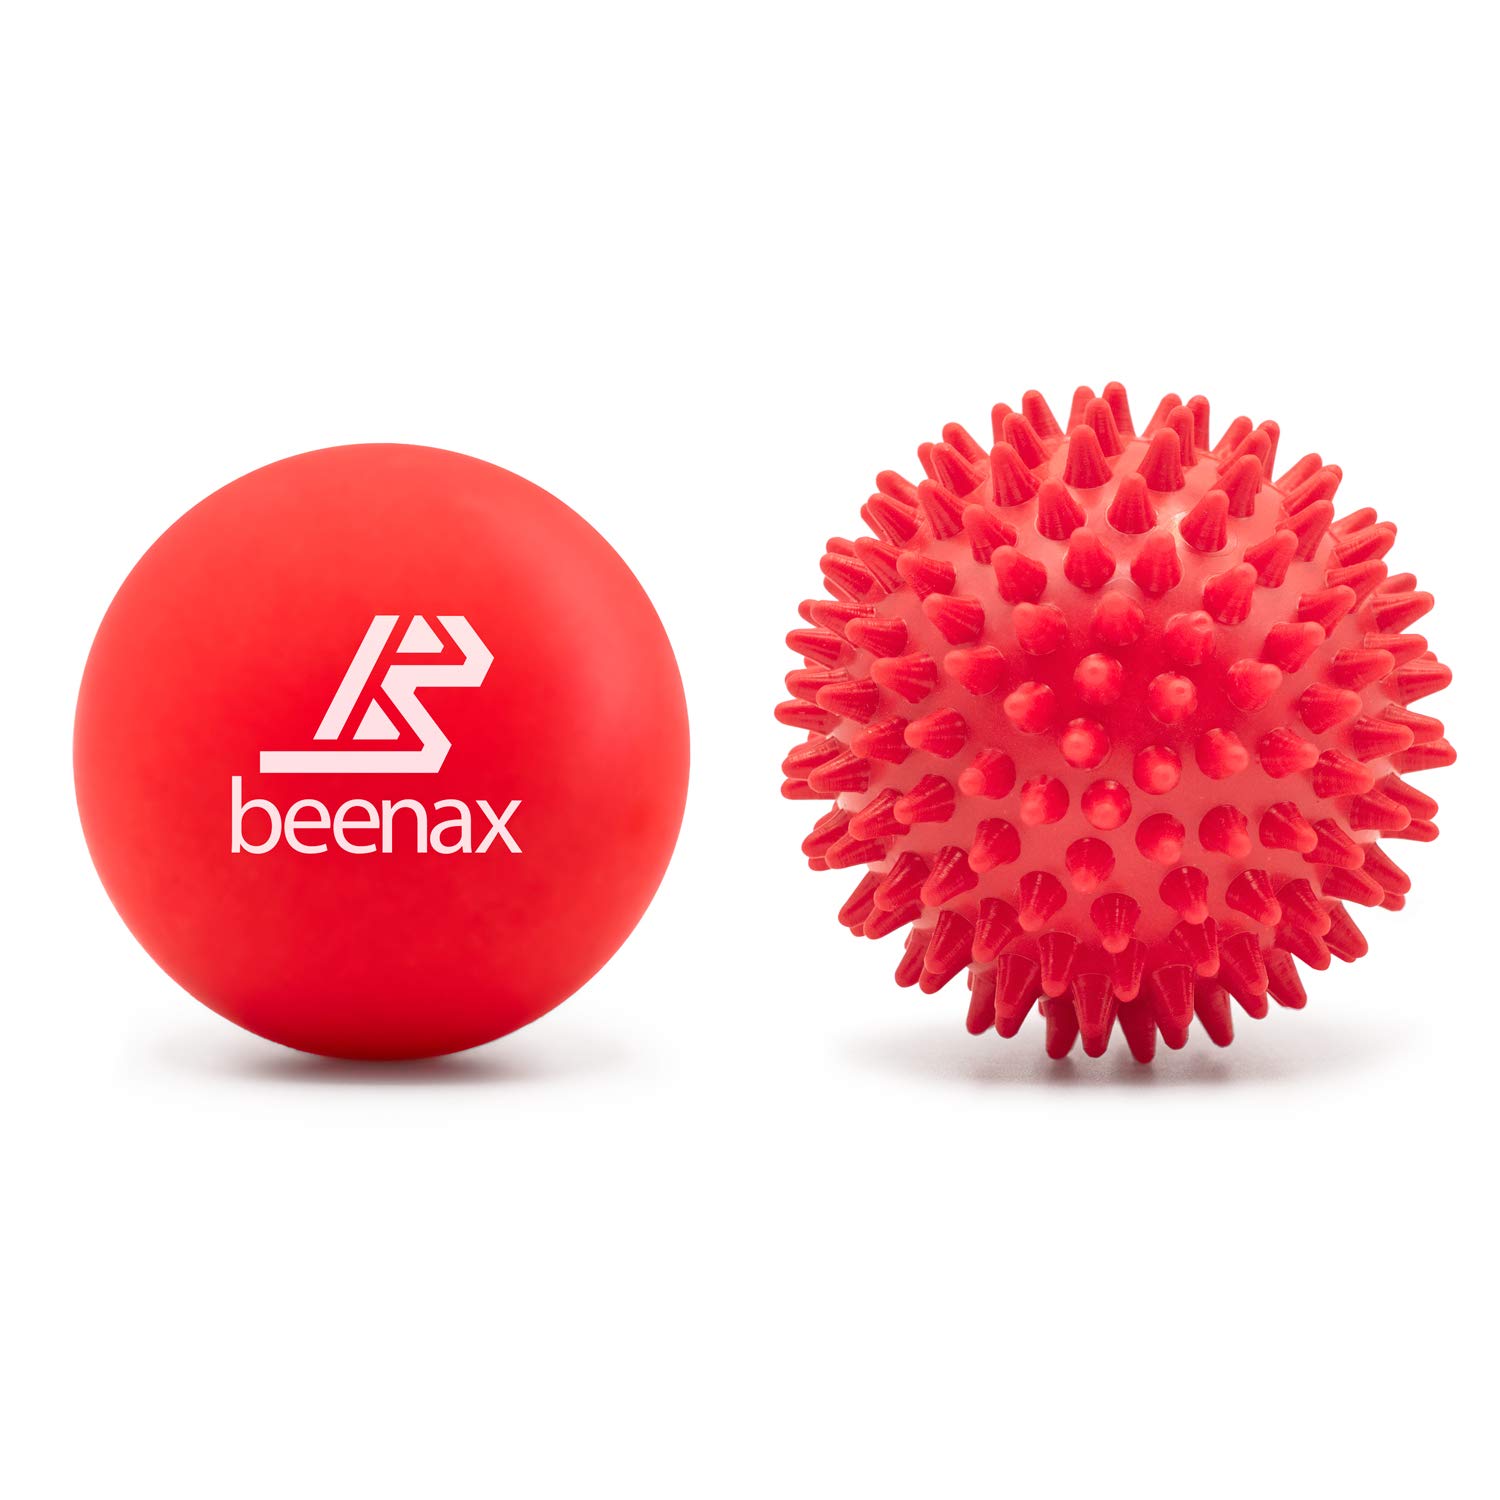 Mua Beenax Lacrosse And Spiky Massage Ball Set Perfect For Trigger Point Therapy Myofascial